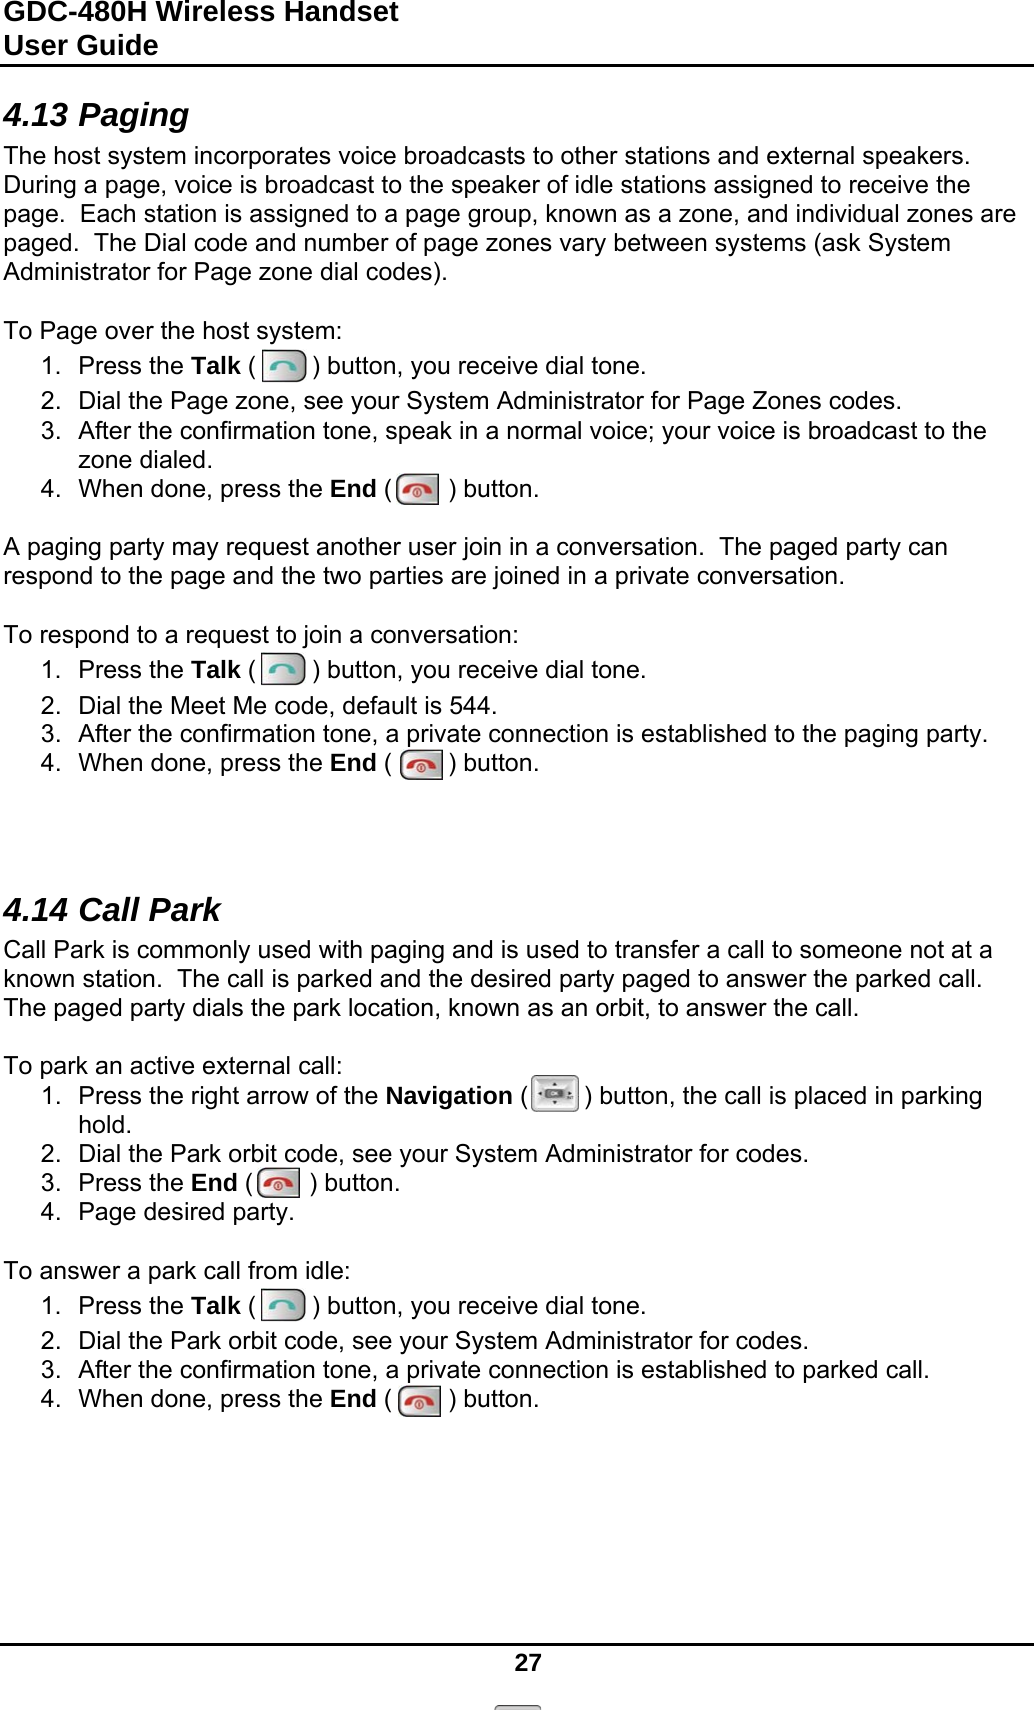 GDC-480H Wireless Handset User Guide   27  4.13 Paging The host system incorporates voice broadcasts to other stations and external speakers.  During a page, voice is broadcast to the speaker of idle stations assigned to receive the page.  Each station is assigned to a page group, known as a zone, and individual zones are paged.  The Dial code and number of page zones vary between systems (ask System Administrator for Page zone dial codes).  To Page over the host system: 1. Press the Talk (        ) button, you receive dial tone. 2.  Dial the Page zone, see your System Administrator for Page Zones codes. 3.  After the confirmation tone, speak in a normal voice; your voice is broadcast to the zone dialed. 4.  When done, press the End (        ) button.  A paging party may request another user join in a conversation.  The paged party can respond to the page and the two parties are joined in a private conversation.  To respond to a request to join a conversation: 1. Press the Talk (        ) button, you receive dial tone. 2.  Dial the Meet Me code, default is 544. 3.  After the confirmation tone, a private connection is established to the paging party. 4.  When done, press the End (        ) button.    4.14 Call Park Call Park is commonly used with paging and is used to transfer a call to someone not at a known station.  The call is parked and the desired party paged to answer the parked call.  The paged party dials the park location, known as an orbit, to answer the call.  To park an active external call: 1.  Press the right arrow of the Navigation (        ) button, the call is placed in parking hold. 2.  Dial the Park orbit code, see your System Administrator for codes. 3. Press the End (        ) button. 4.  Page desired party.  To answer a park call from idle: 1. Press the Talk (        ) button, you receive dial tone. 2.  Dial the Park orbit code, see your System Administrator for codes. 3.  After the confirmation tone, a private connection is established to parked call. 4.  When done, press the End (        ) button.      